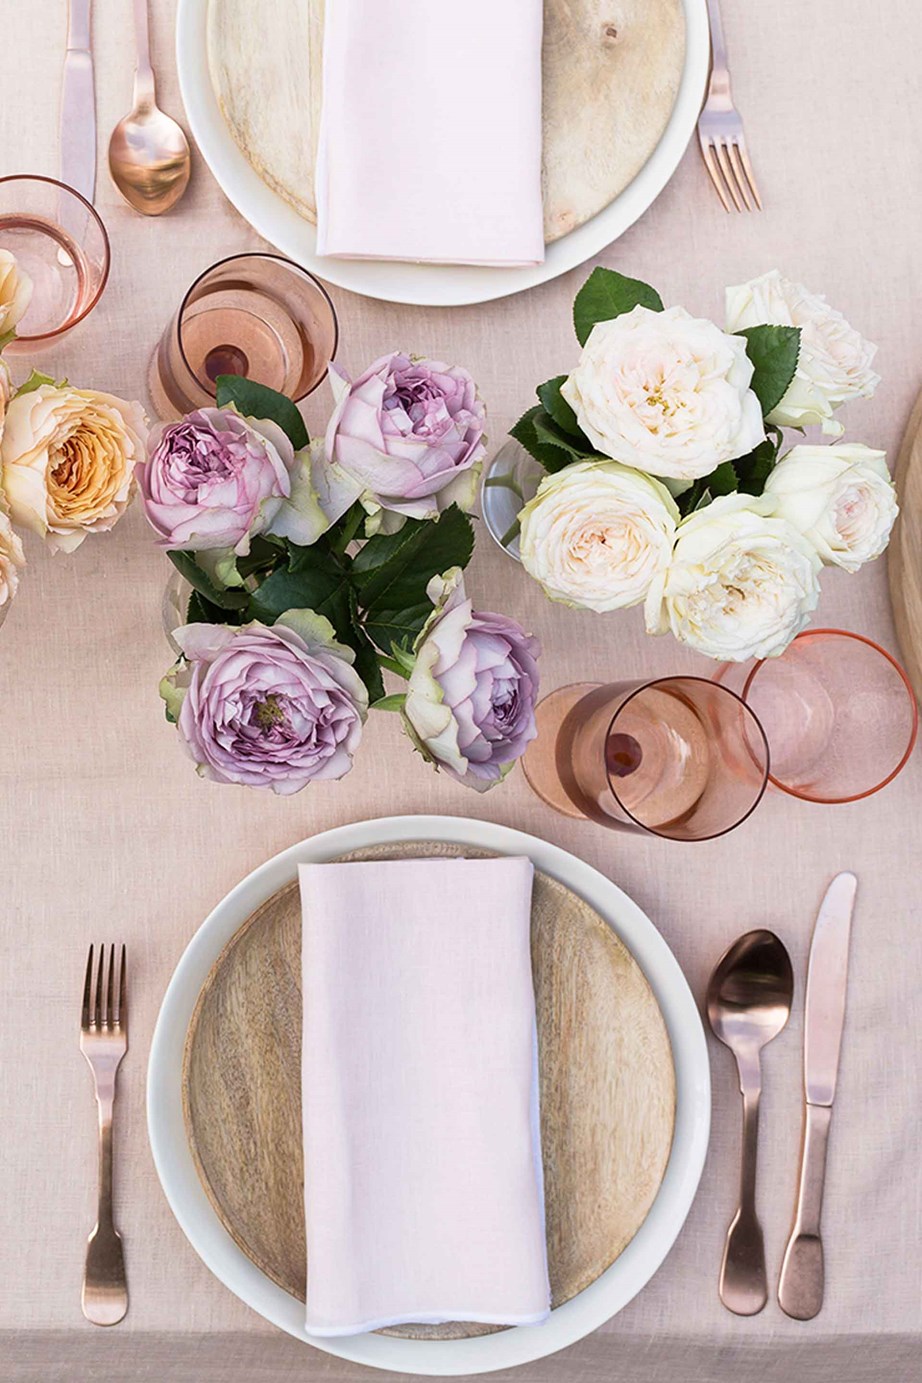 Don't let dull, scratched or tarnished cutlery bring down a [beautiful table setting](https://www.homestolove.com.au/create-a-lovely-table-setting-8747|target="_blank").